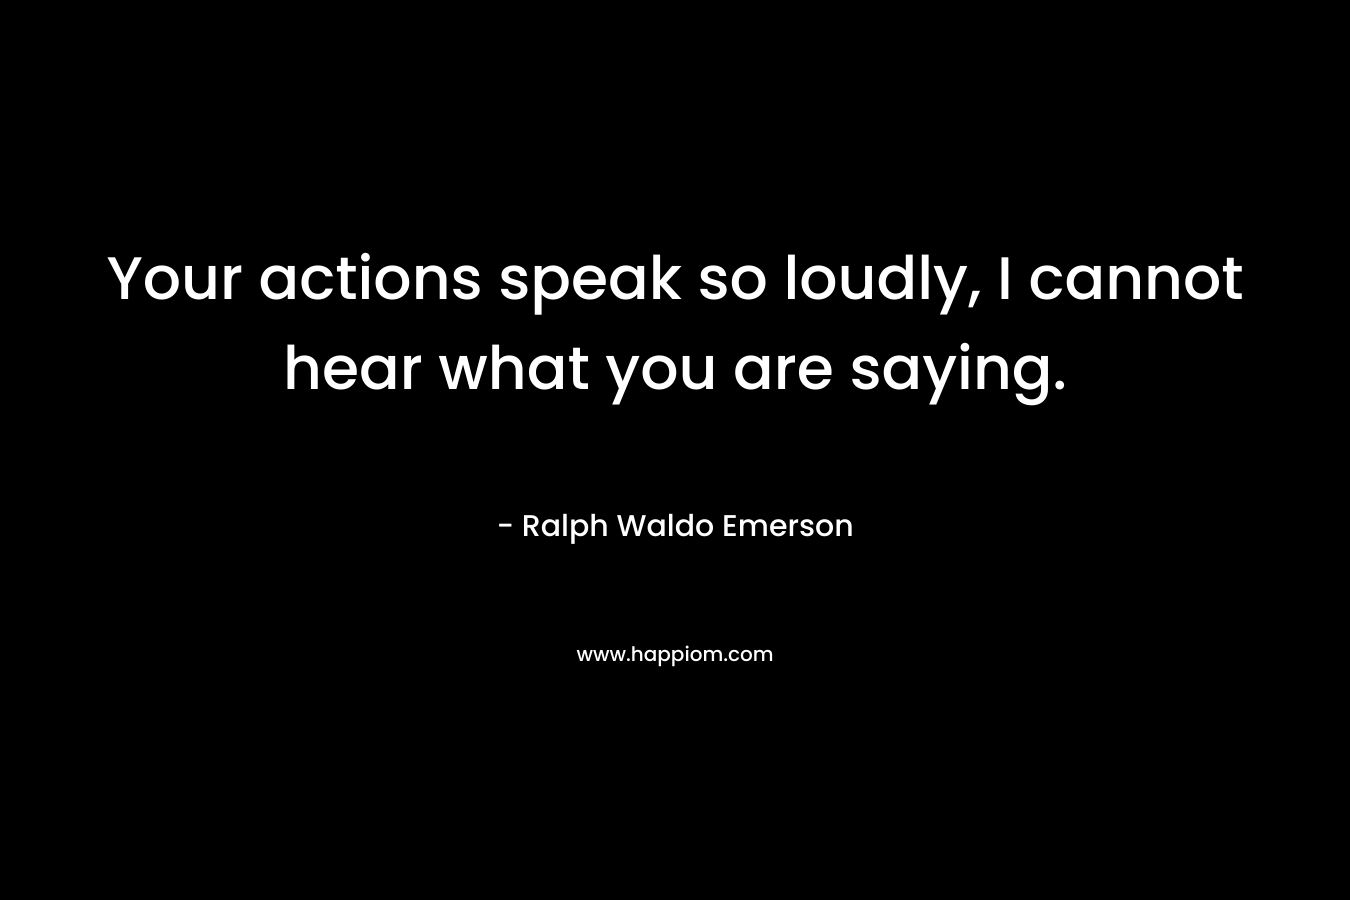 Your actions speak so loudly, I cannot hear what you are saying.